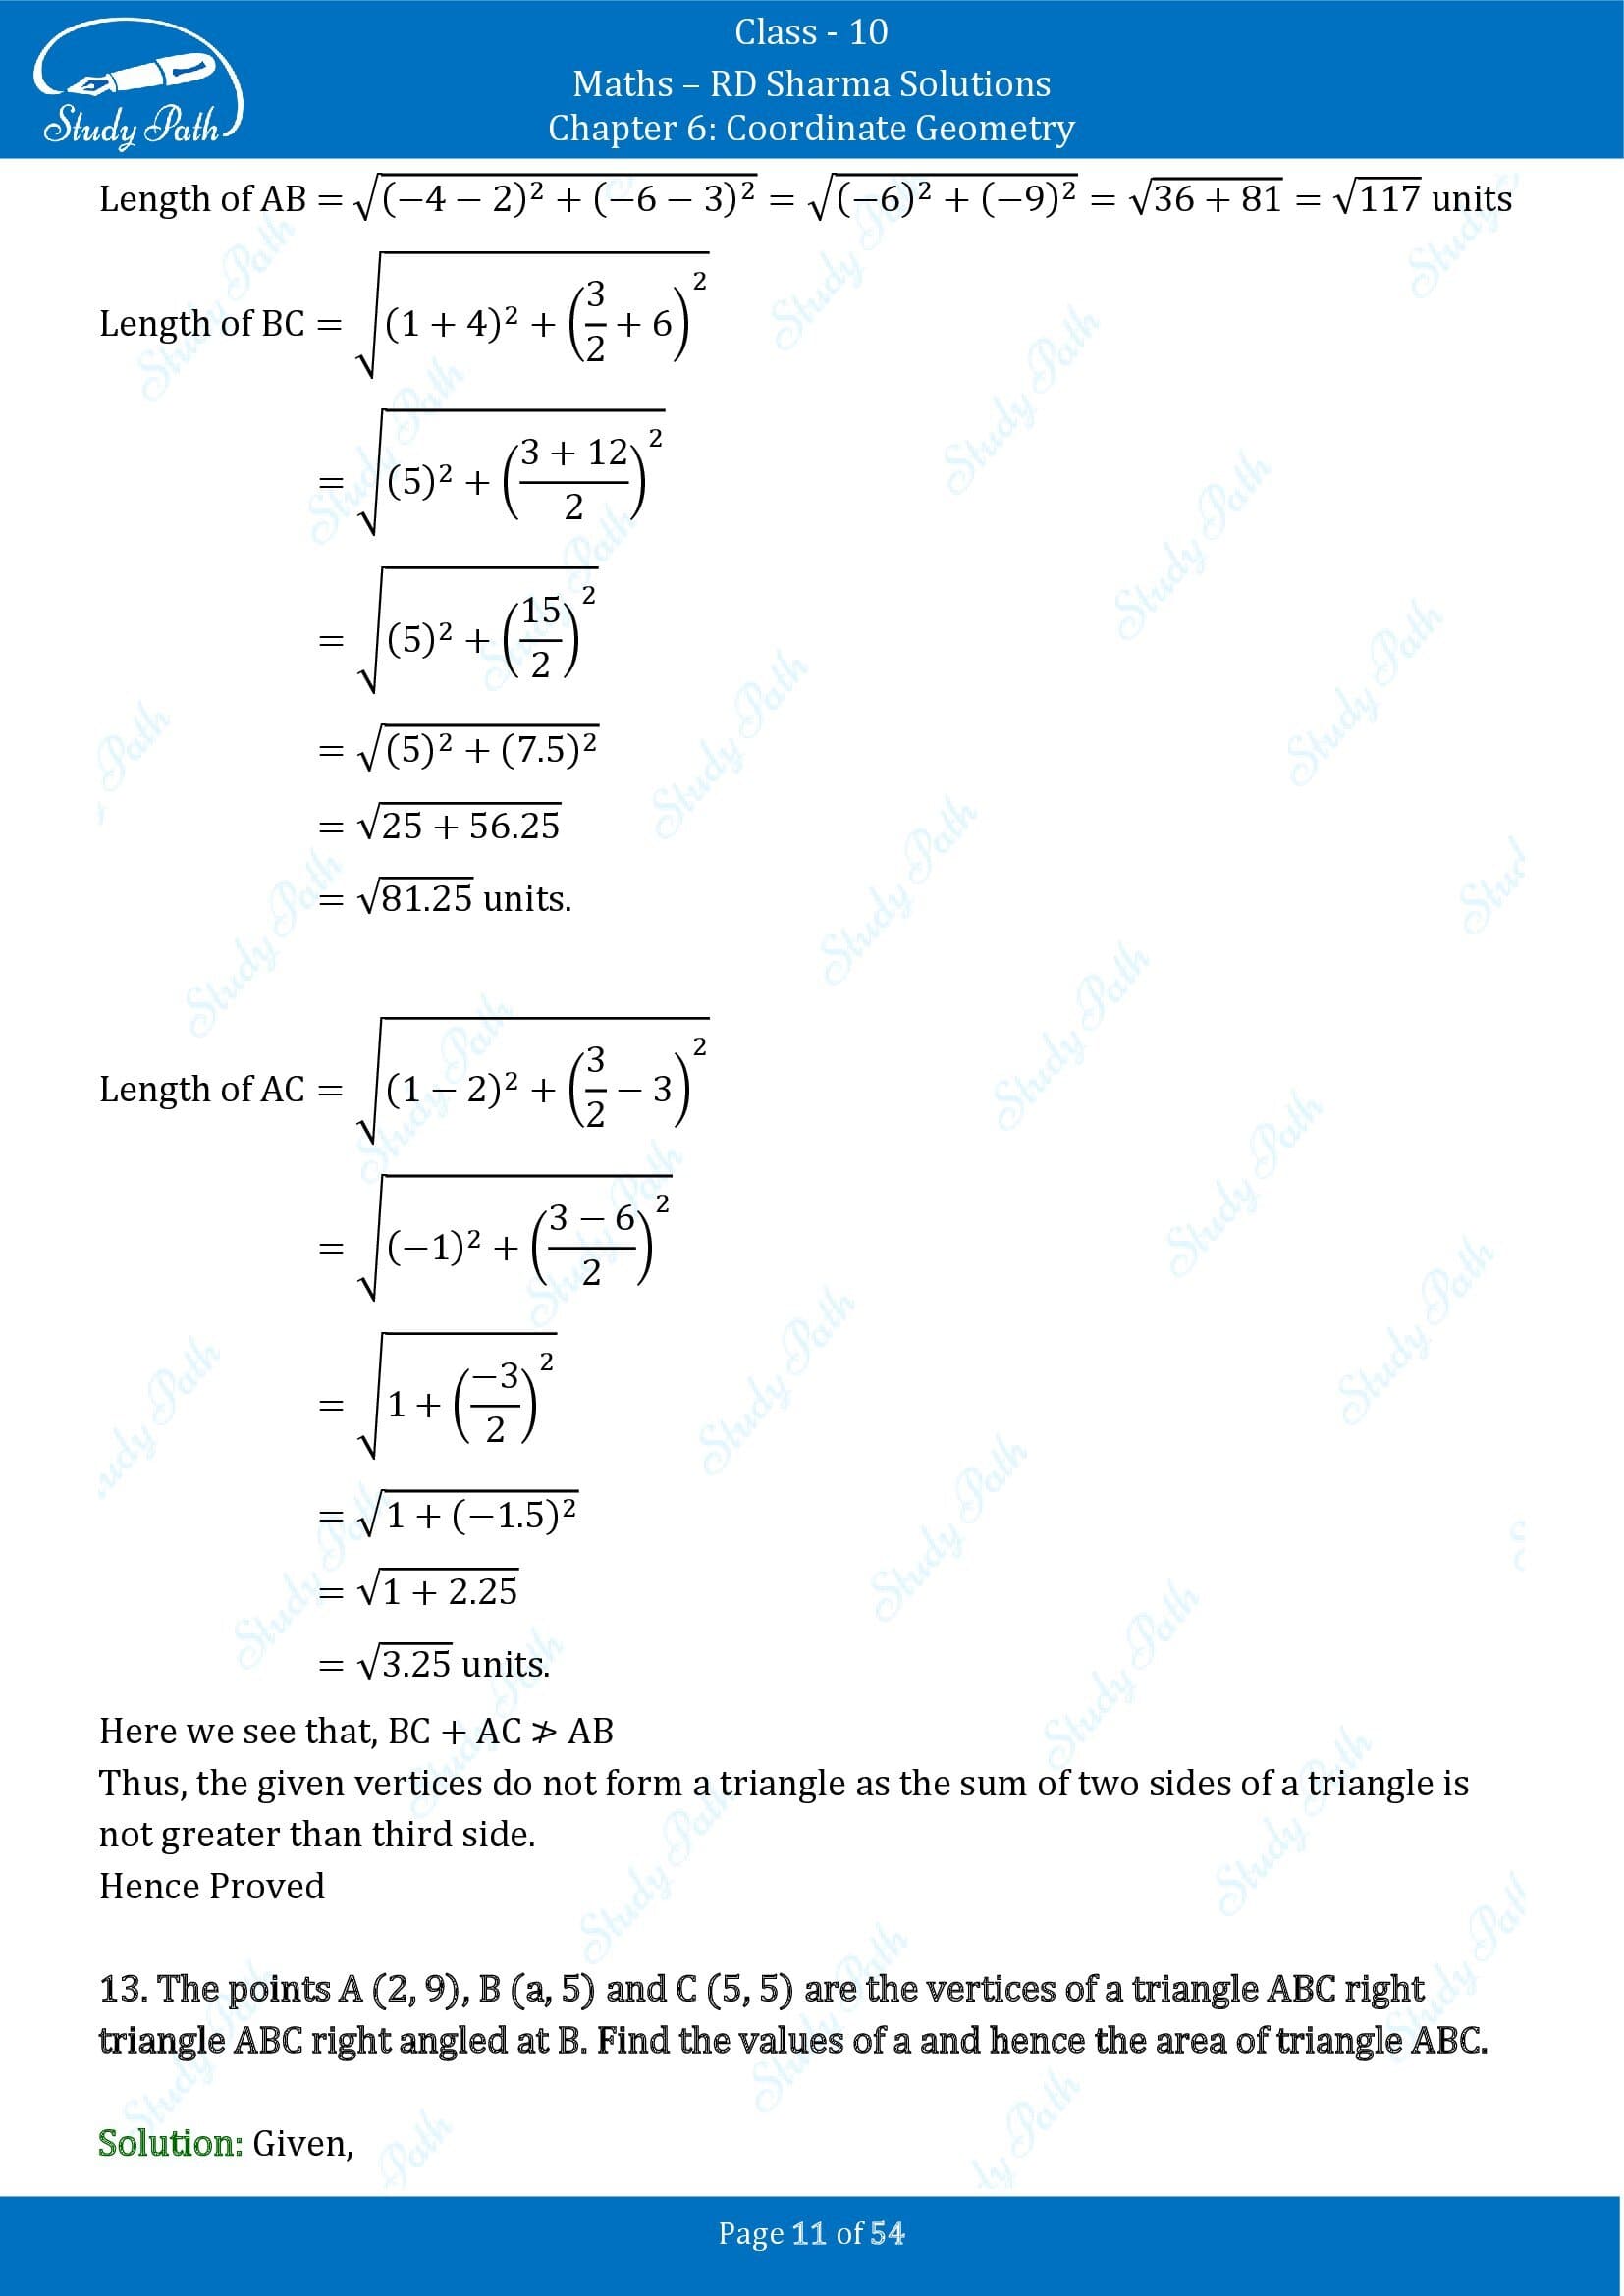 RD Sharma Solutions Class 10 Chapter 6 Coordinate Geometry Exercise 6.2 0011